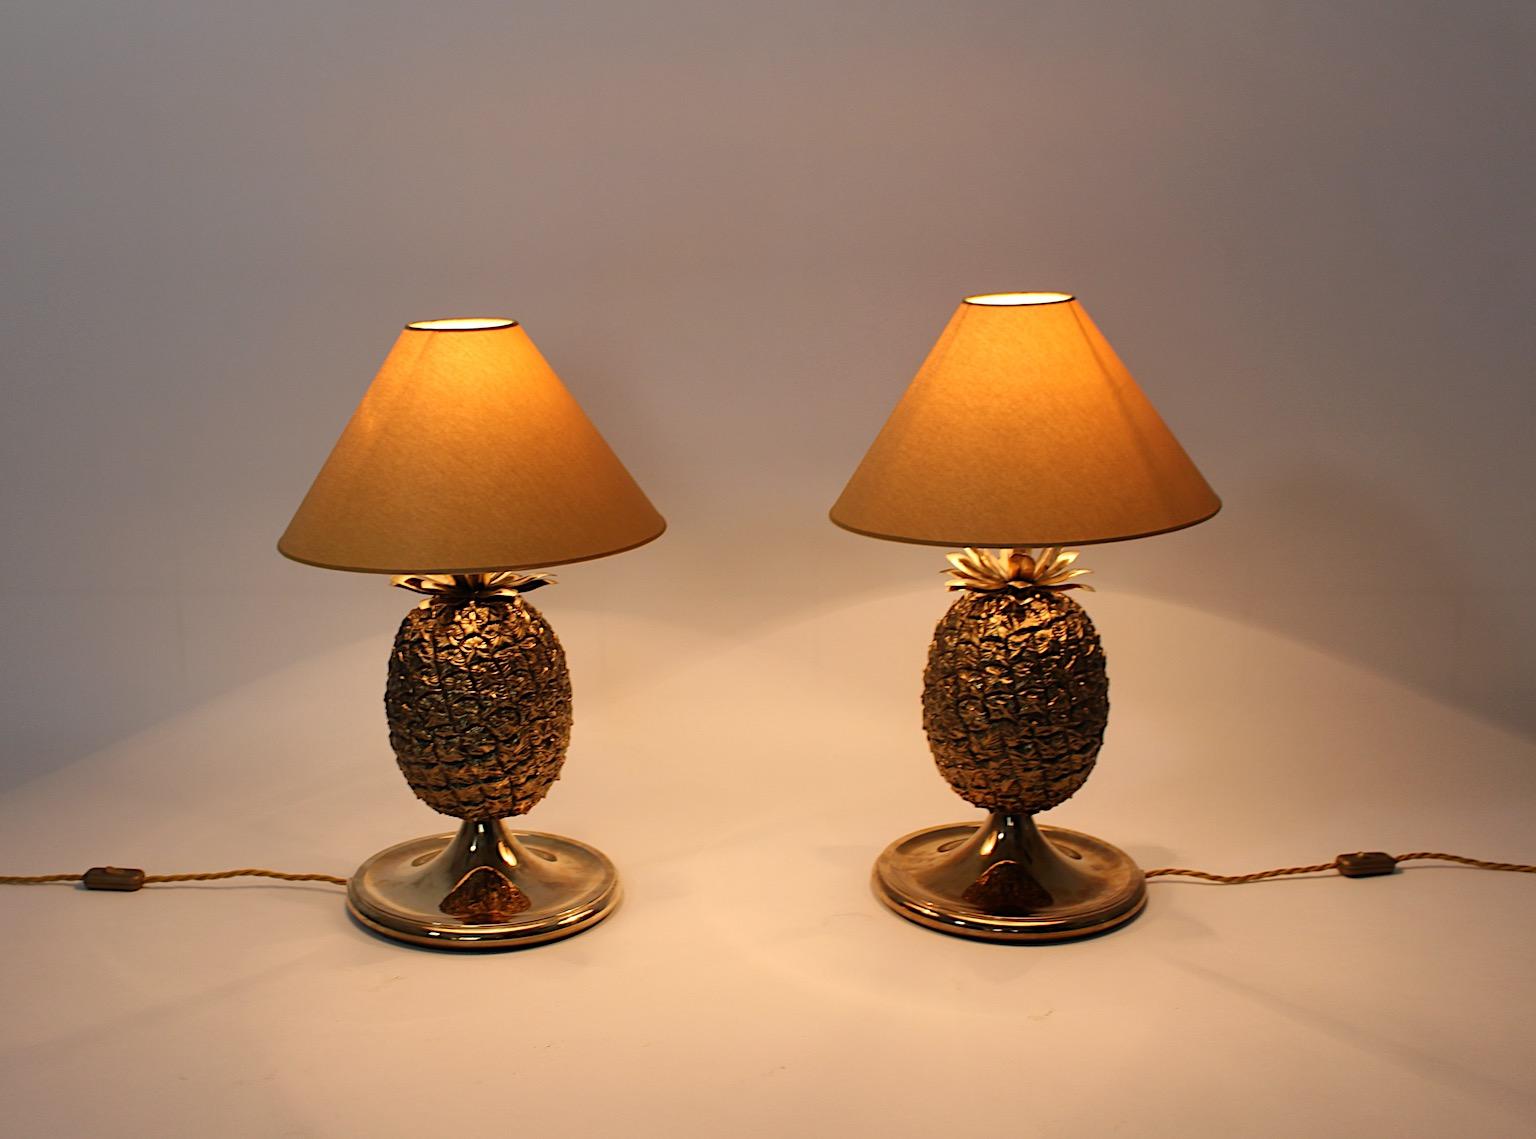 Hollywood Regency Style vintage organic pineapple like table lamps duo pair  circa 1970, Italy.
A stunning pair of table lamps in pineapple form from brass, partly patinated, with new customized and hand made lamp shades in golden color.
These table